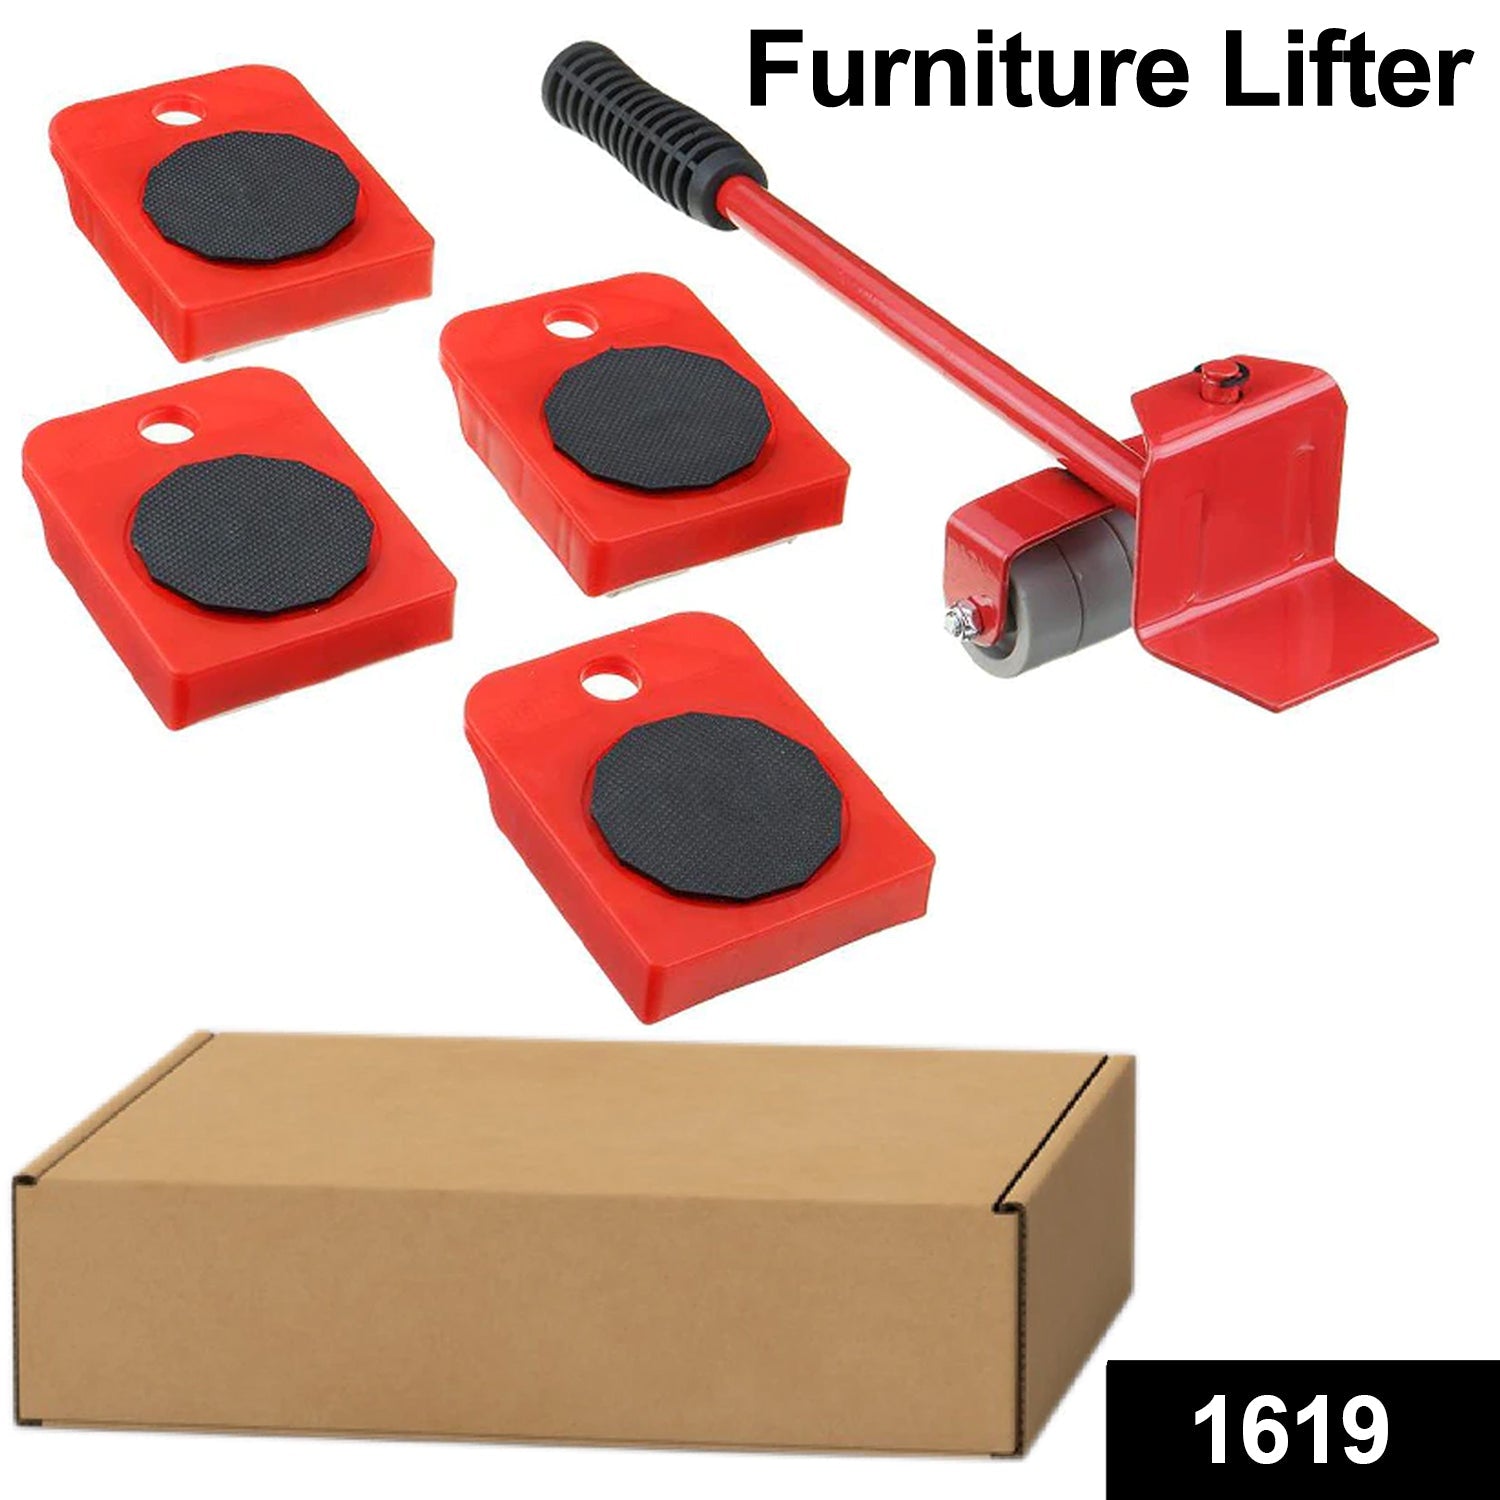 1619 Furniture Lifter Mover Tool Set Heavy Duty Furniture Shifting and Mover DeoDap